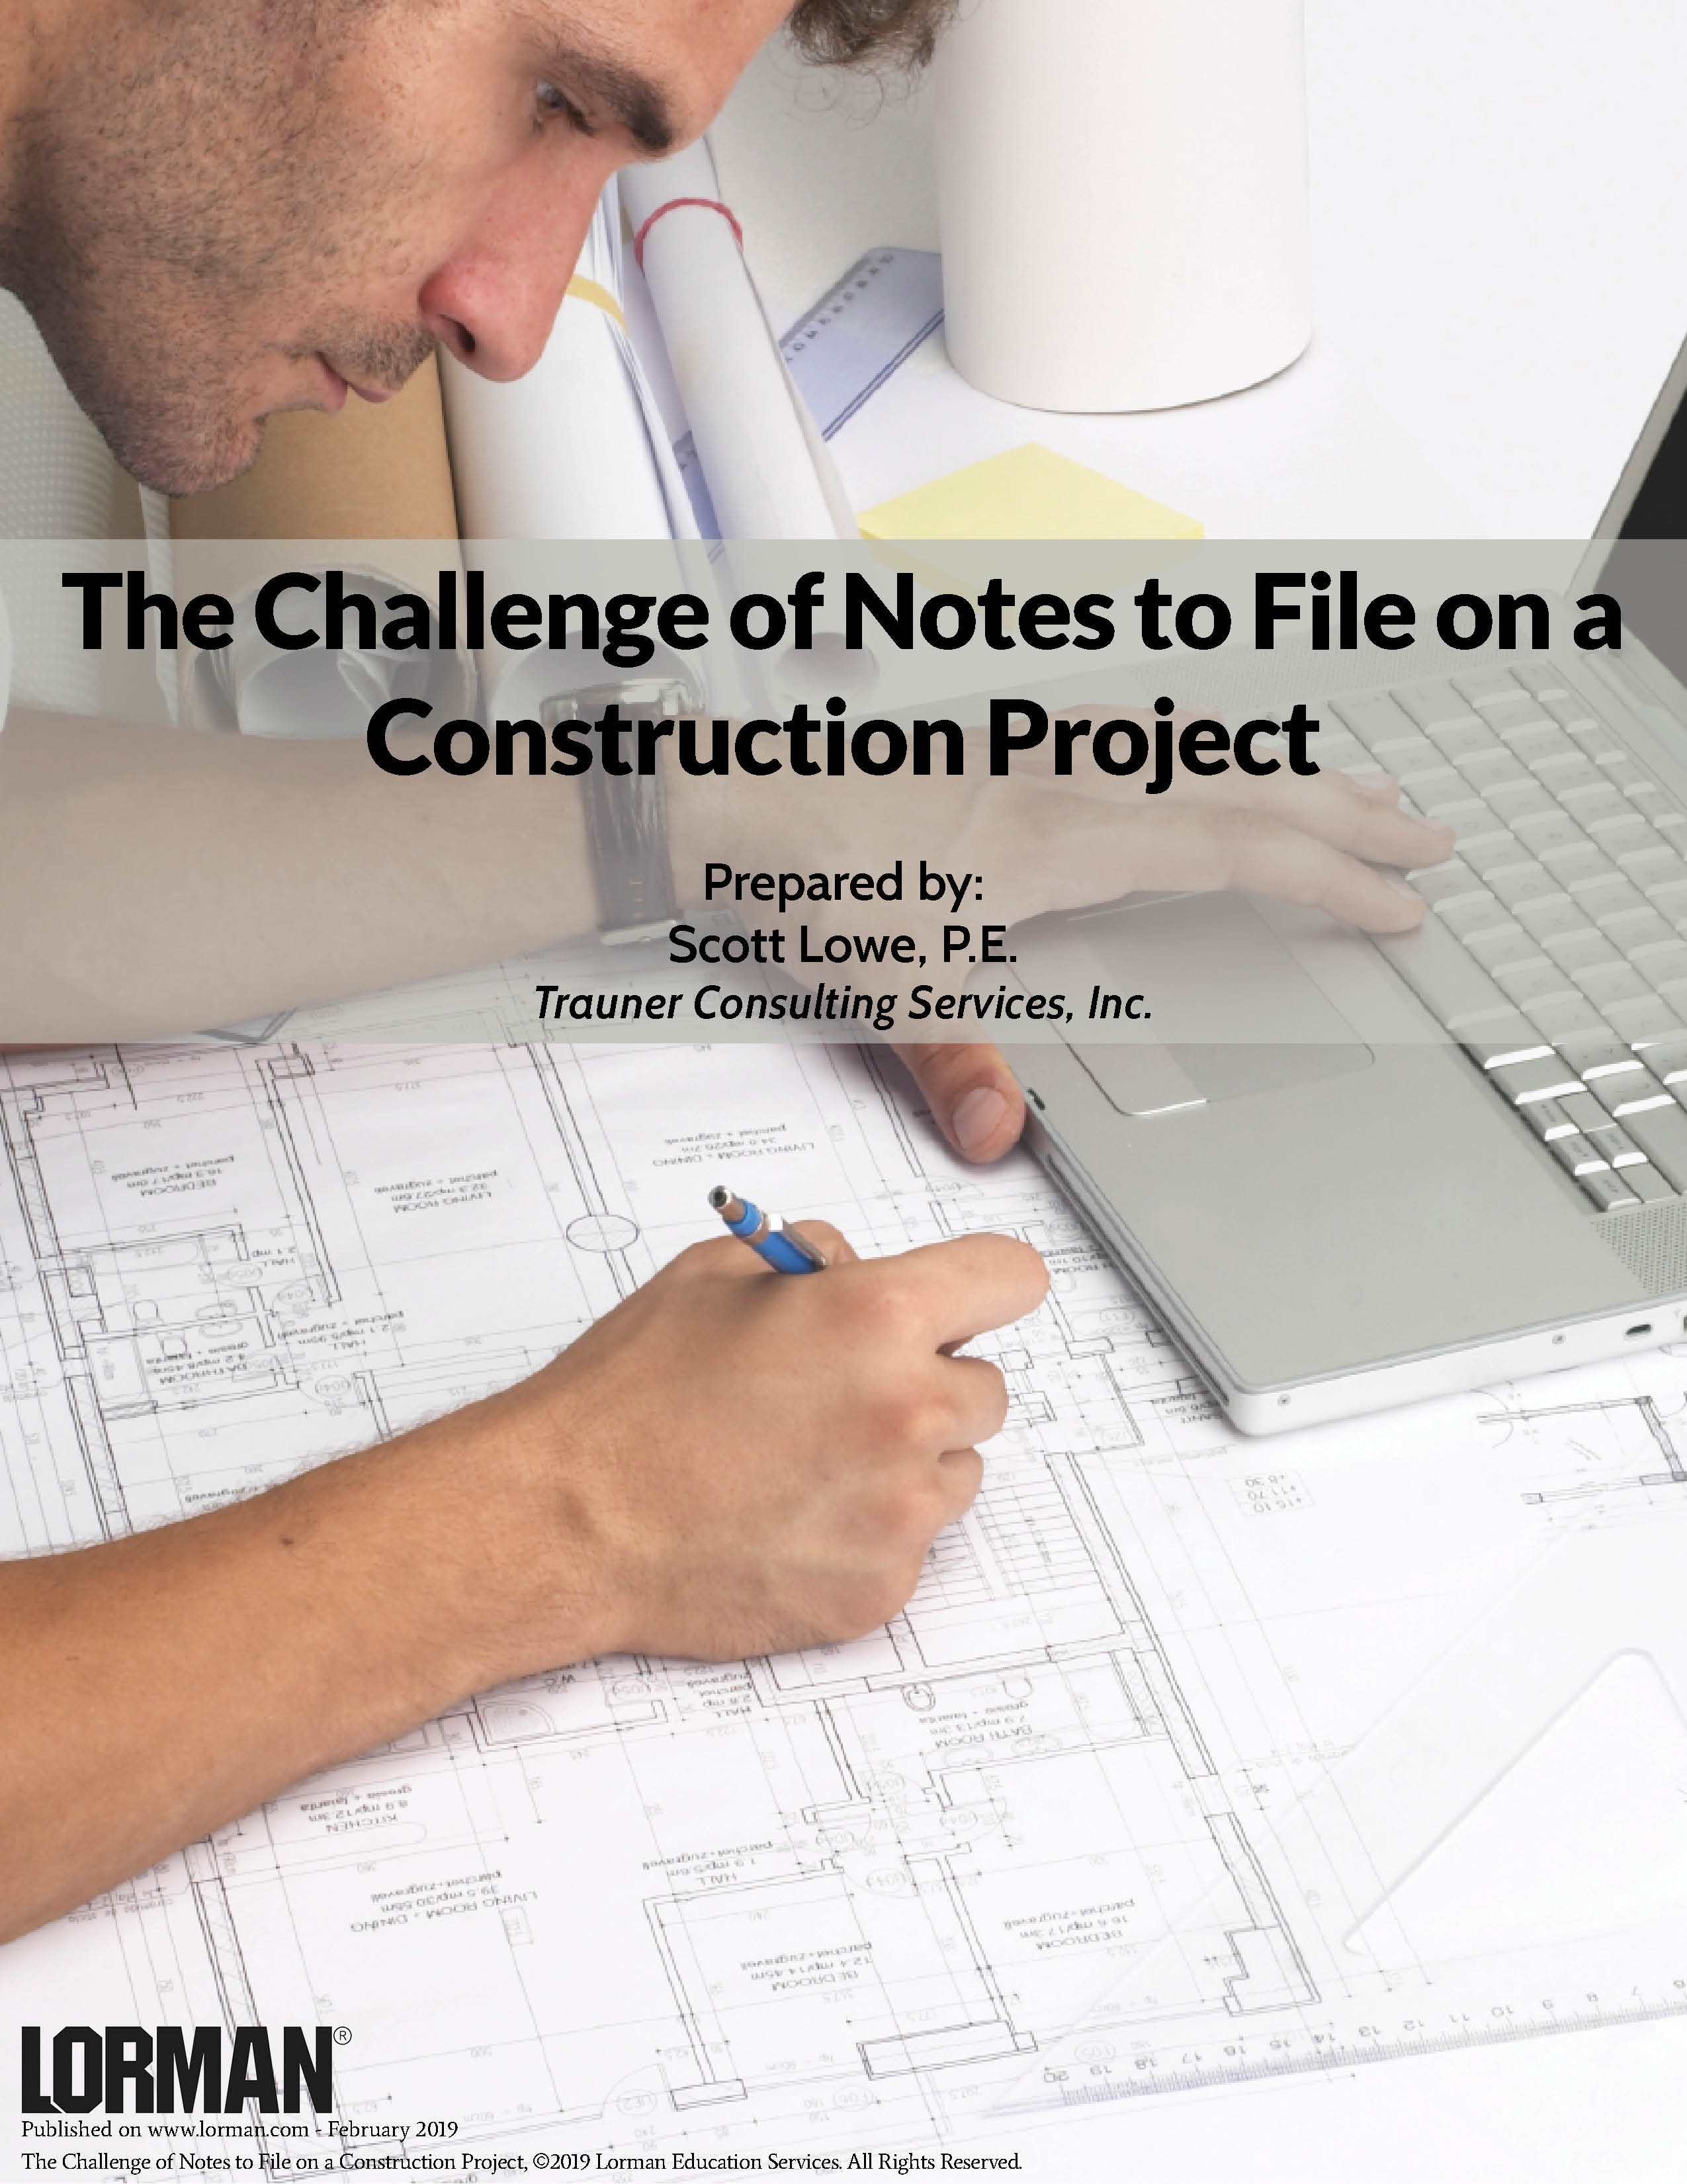 The Challenge of Notes to File on a Construction Project